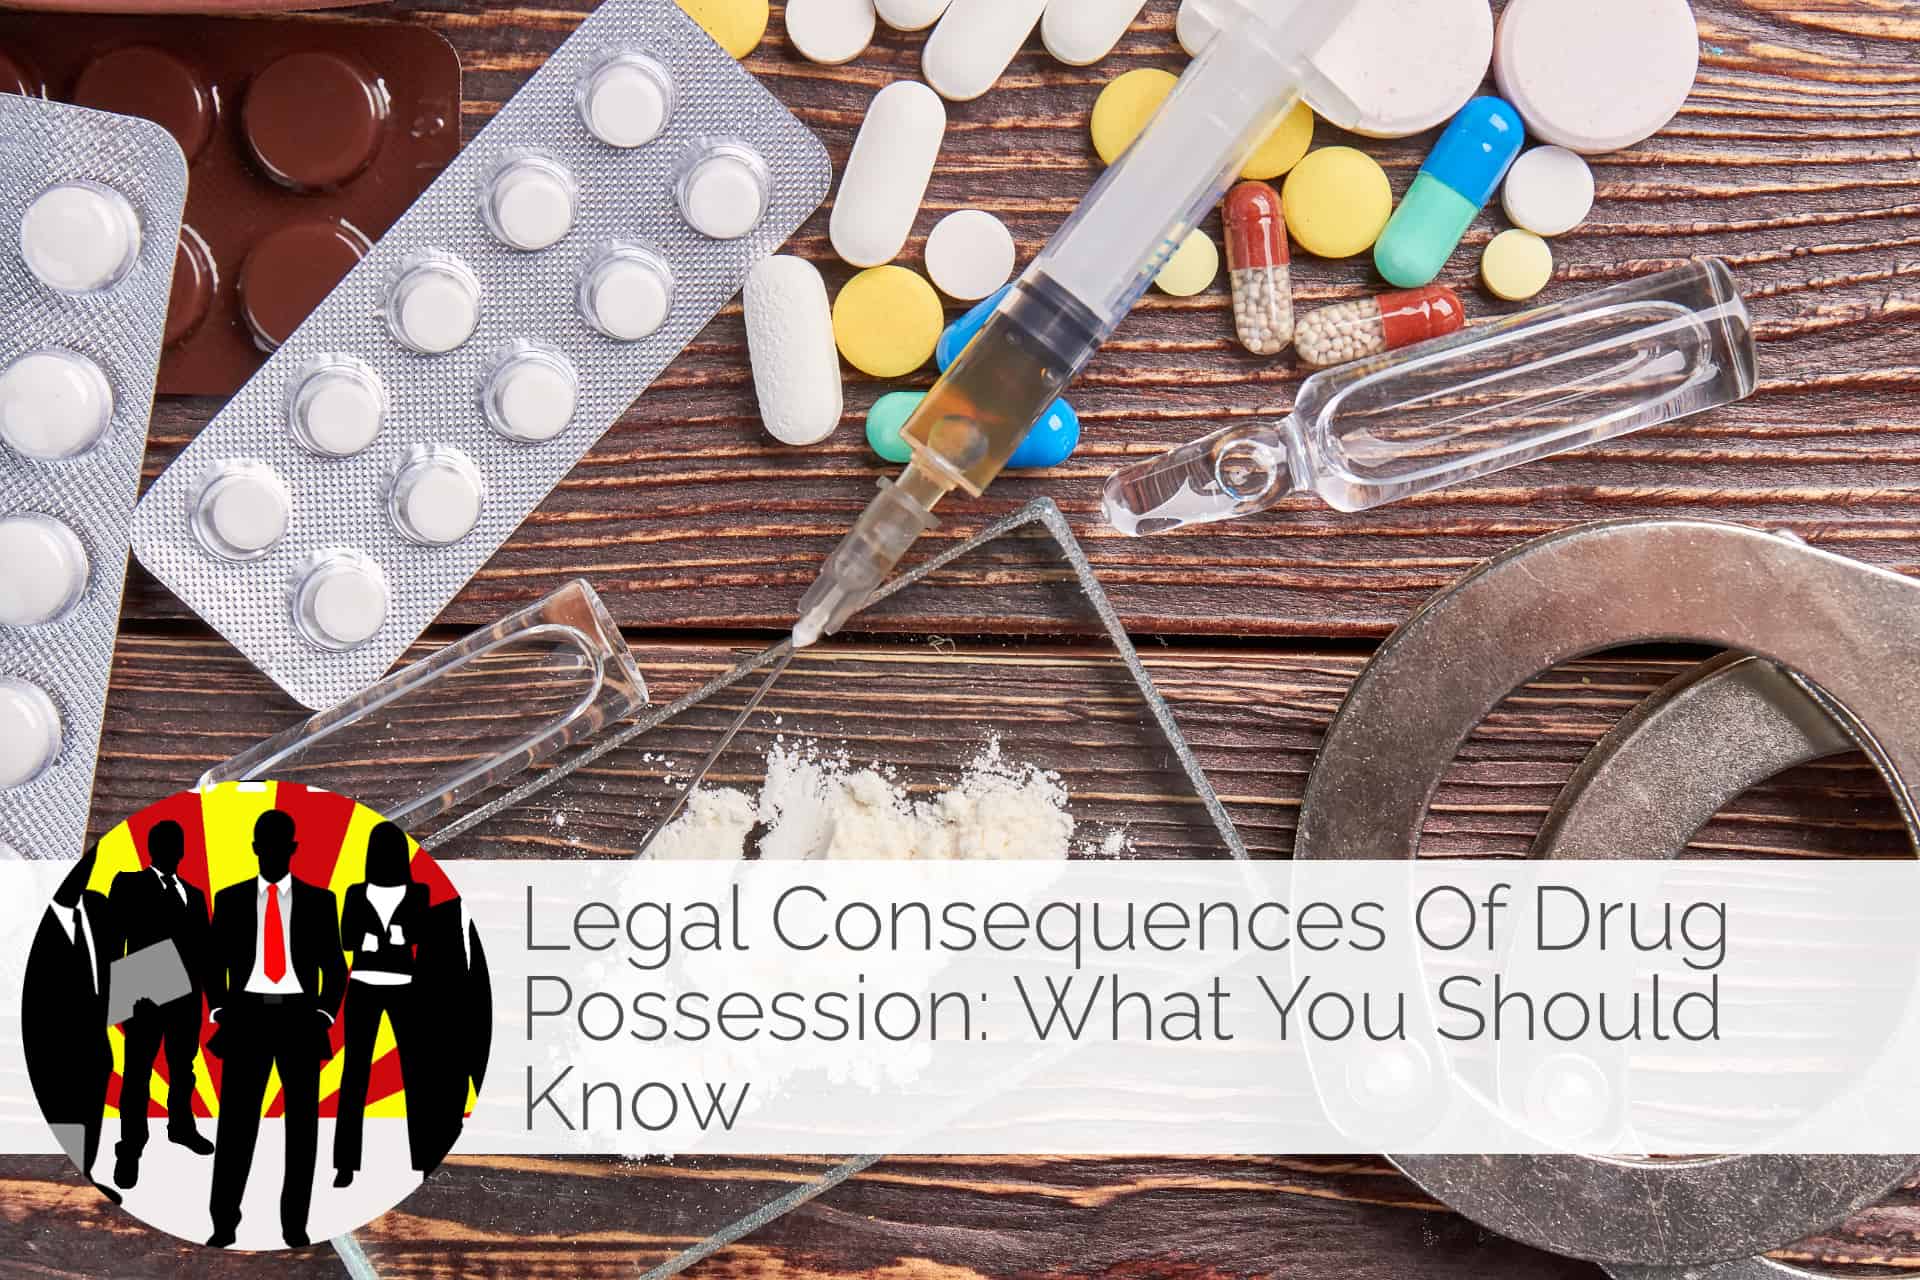 drug possession, consequences